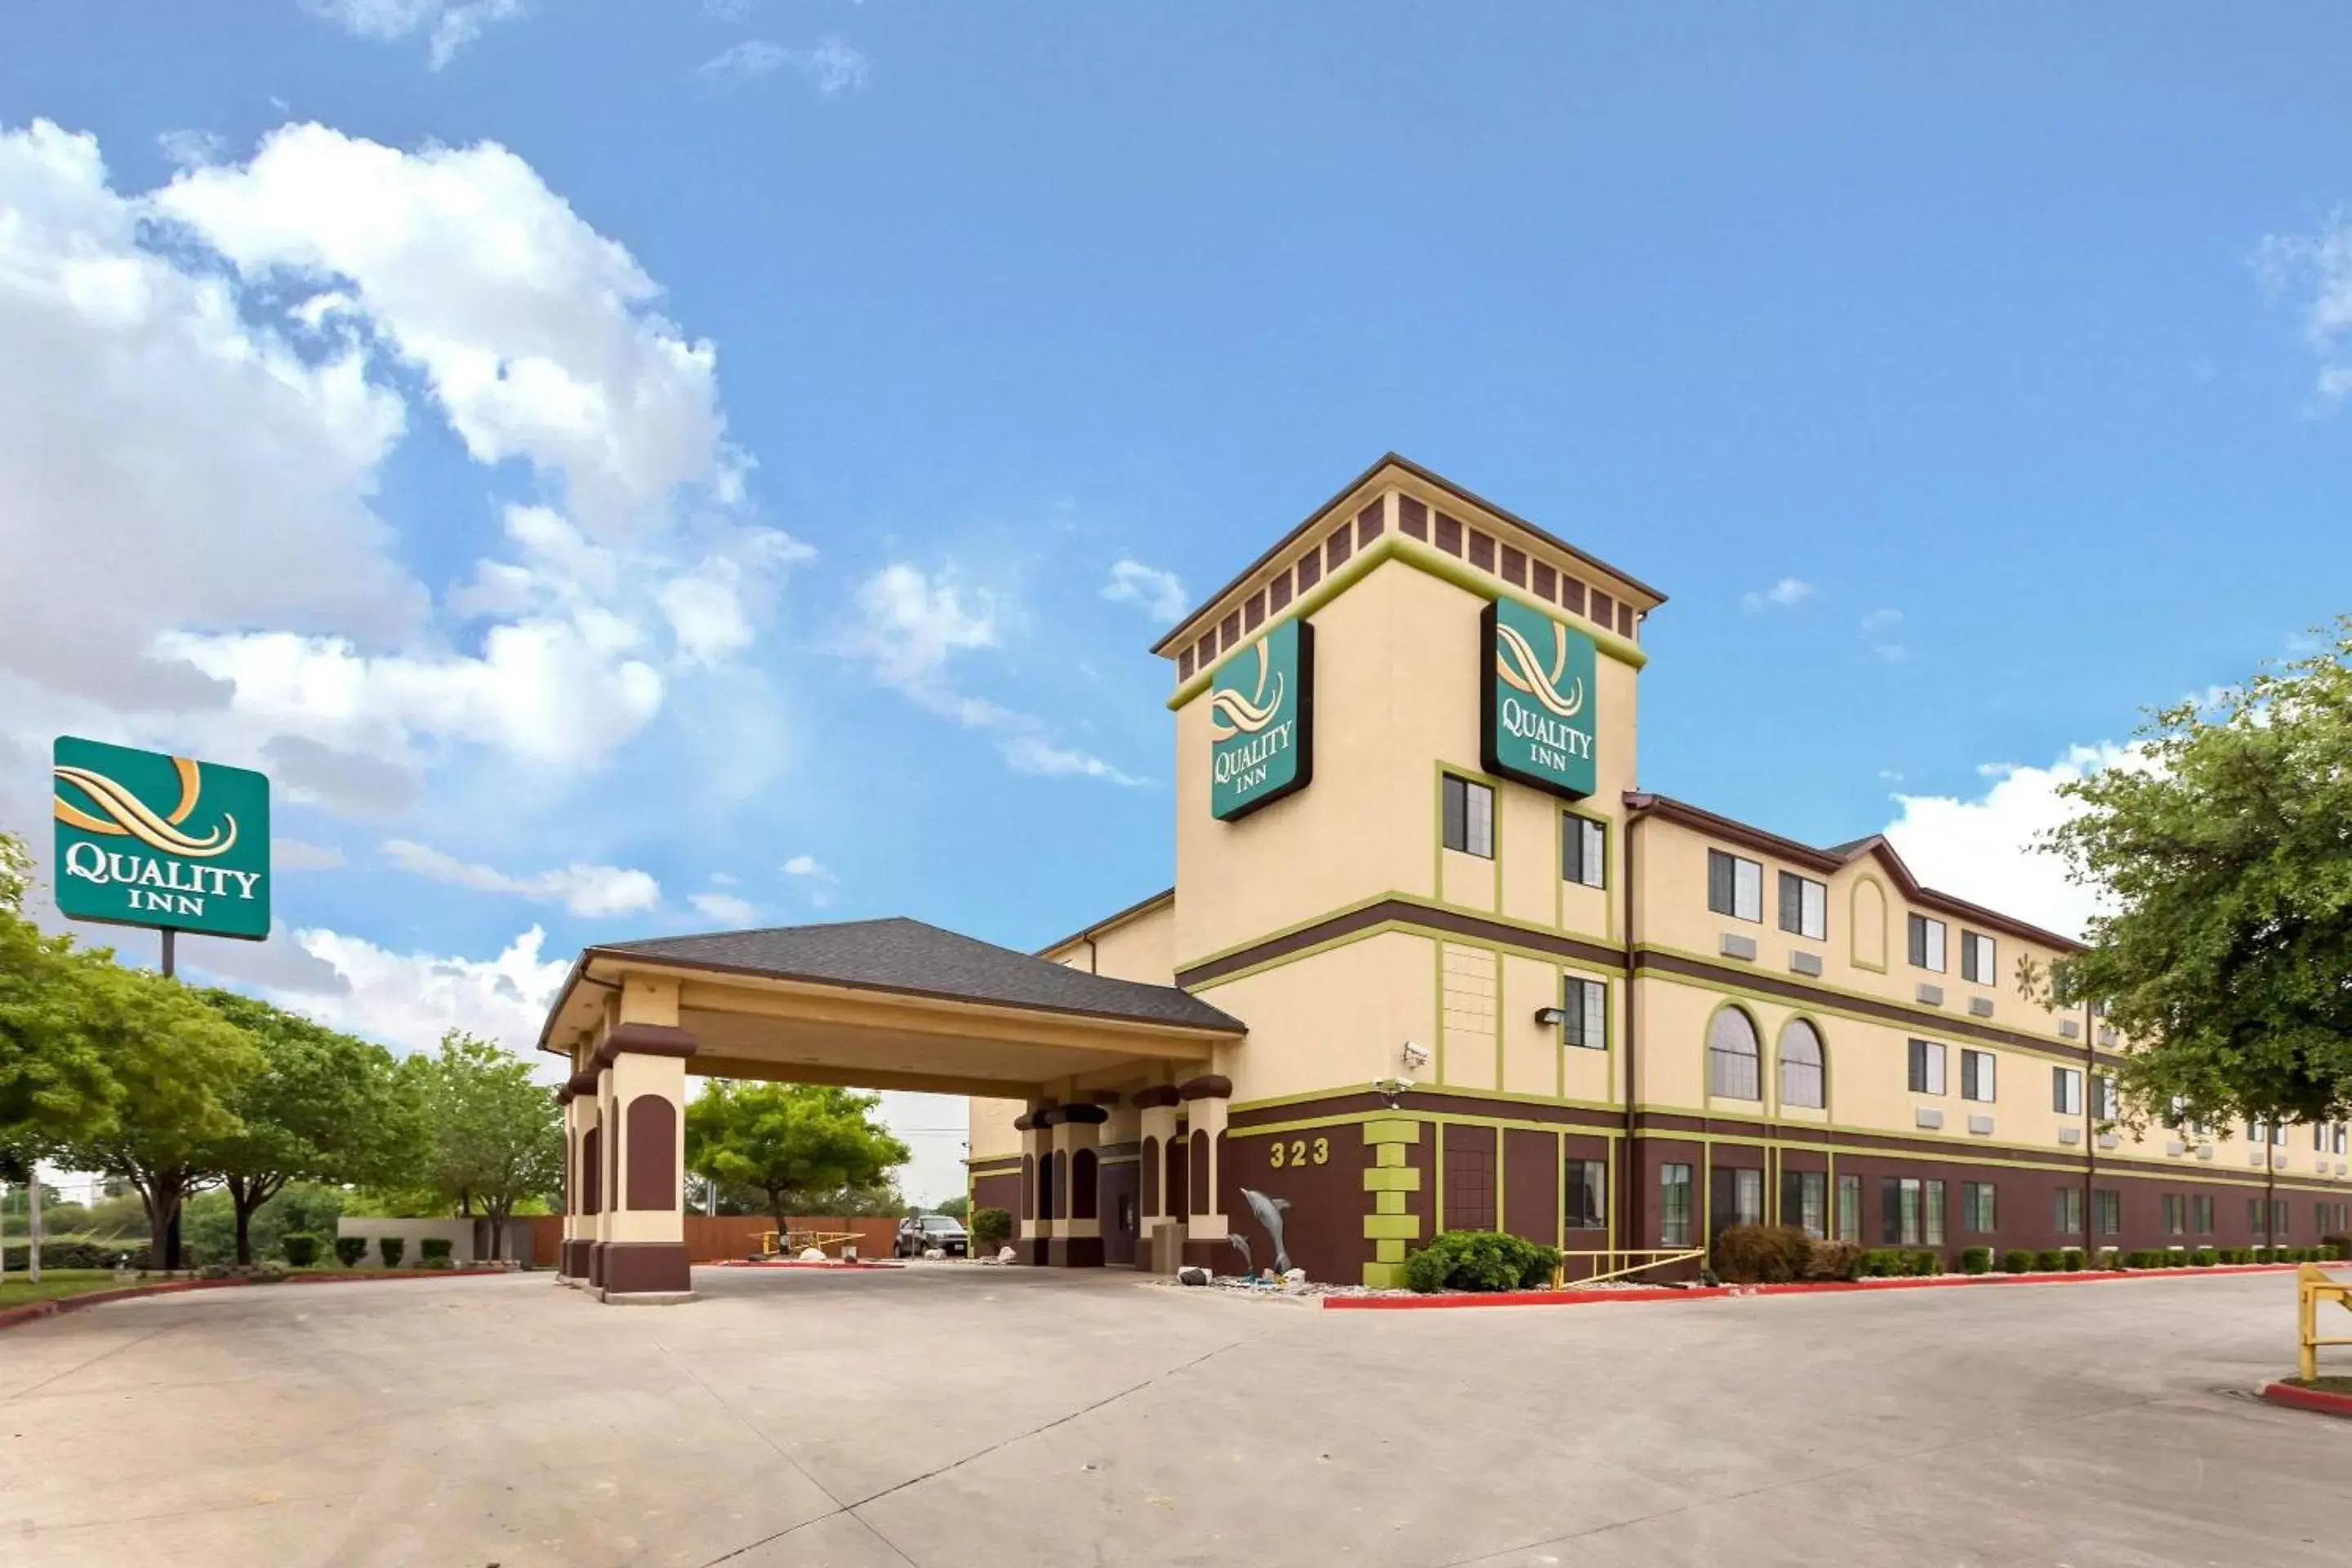 Property building in Quality Inn Near Seaworld - Lackland